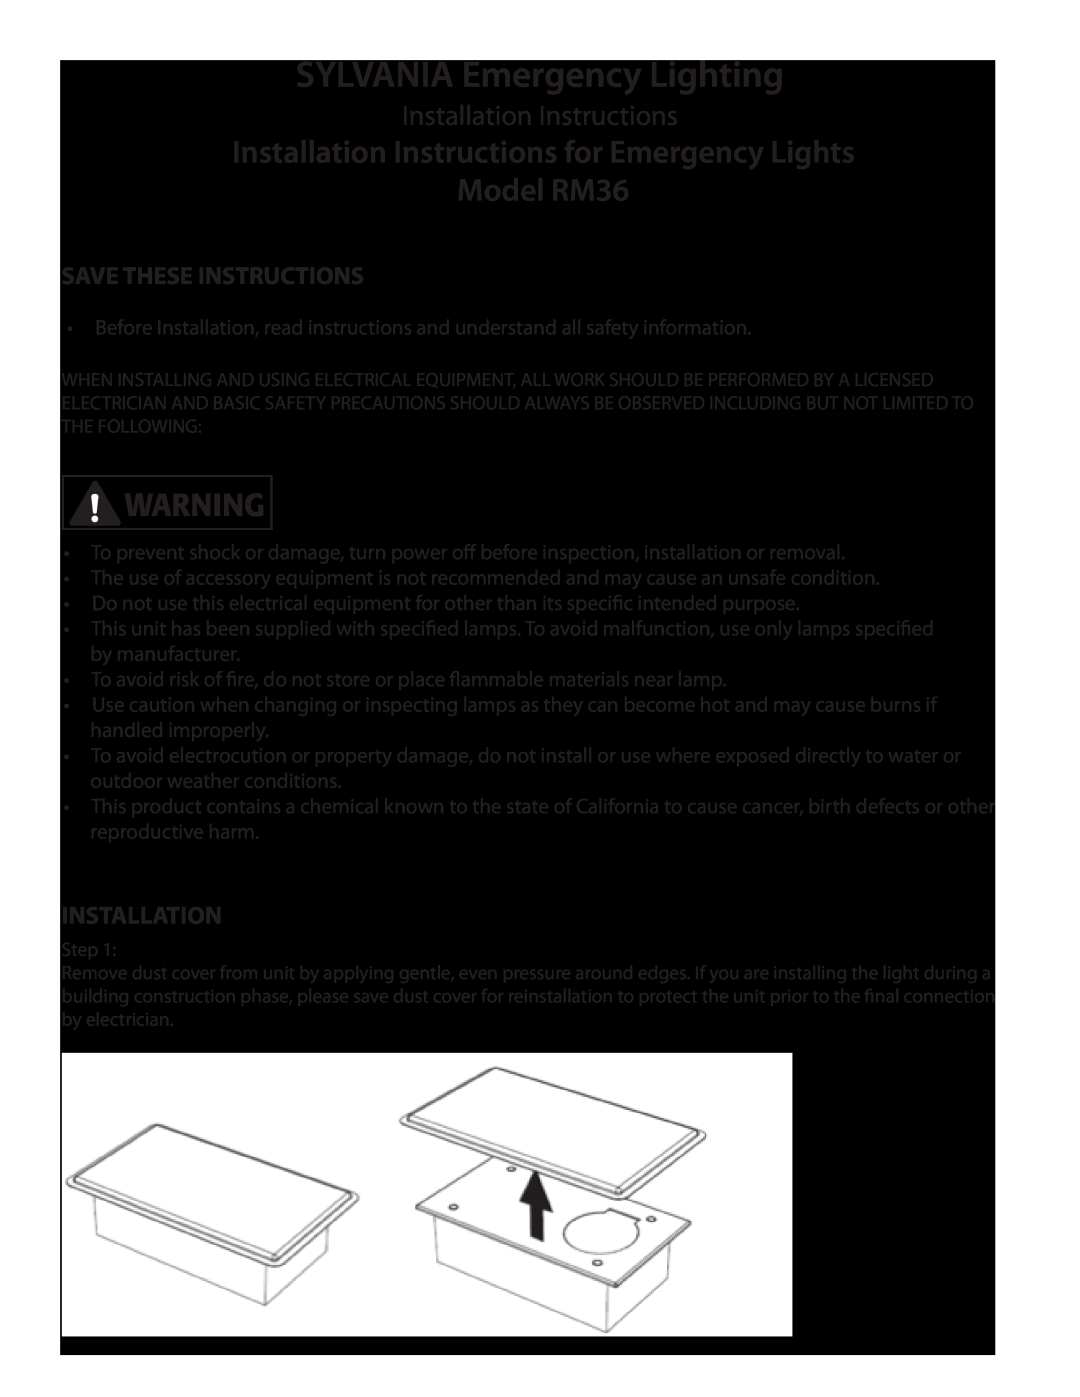 Sylvania installation instructions Save These Instructions, Installation, SYLVANIA Emergency Lighting, Model RM36 